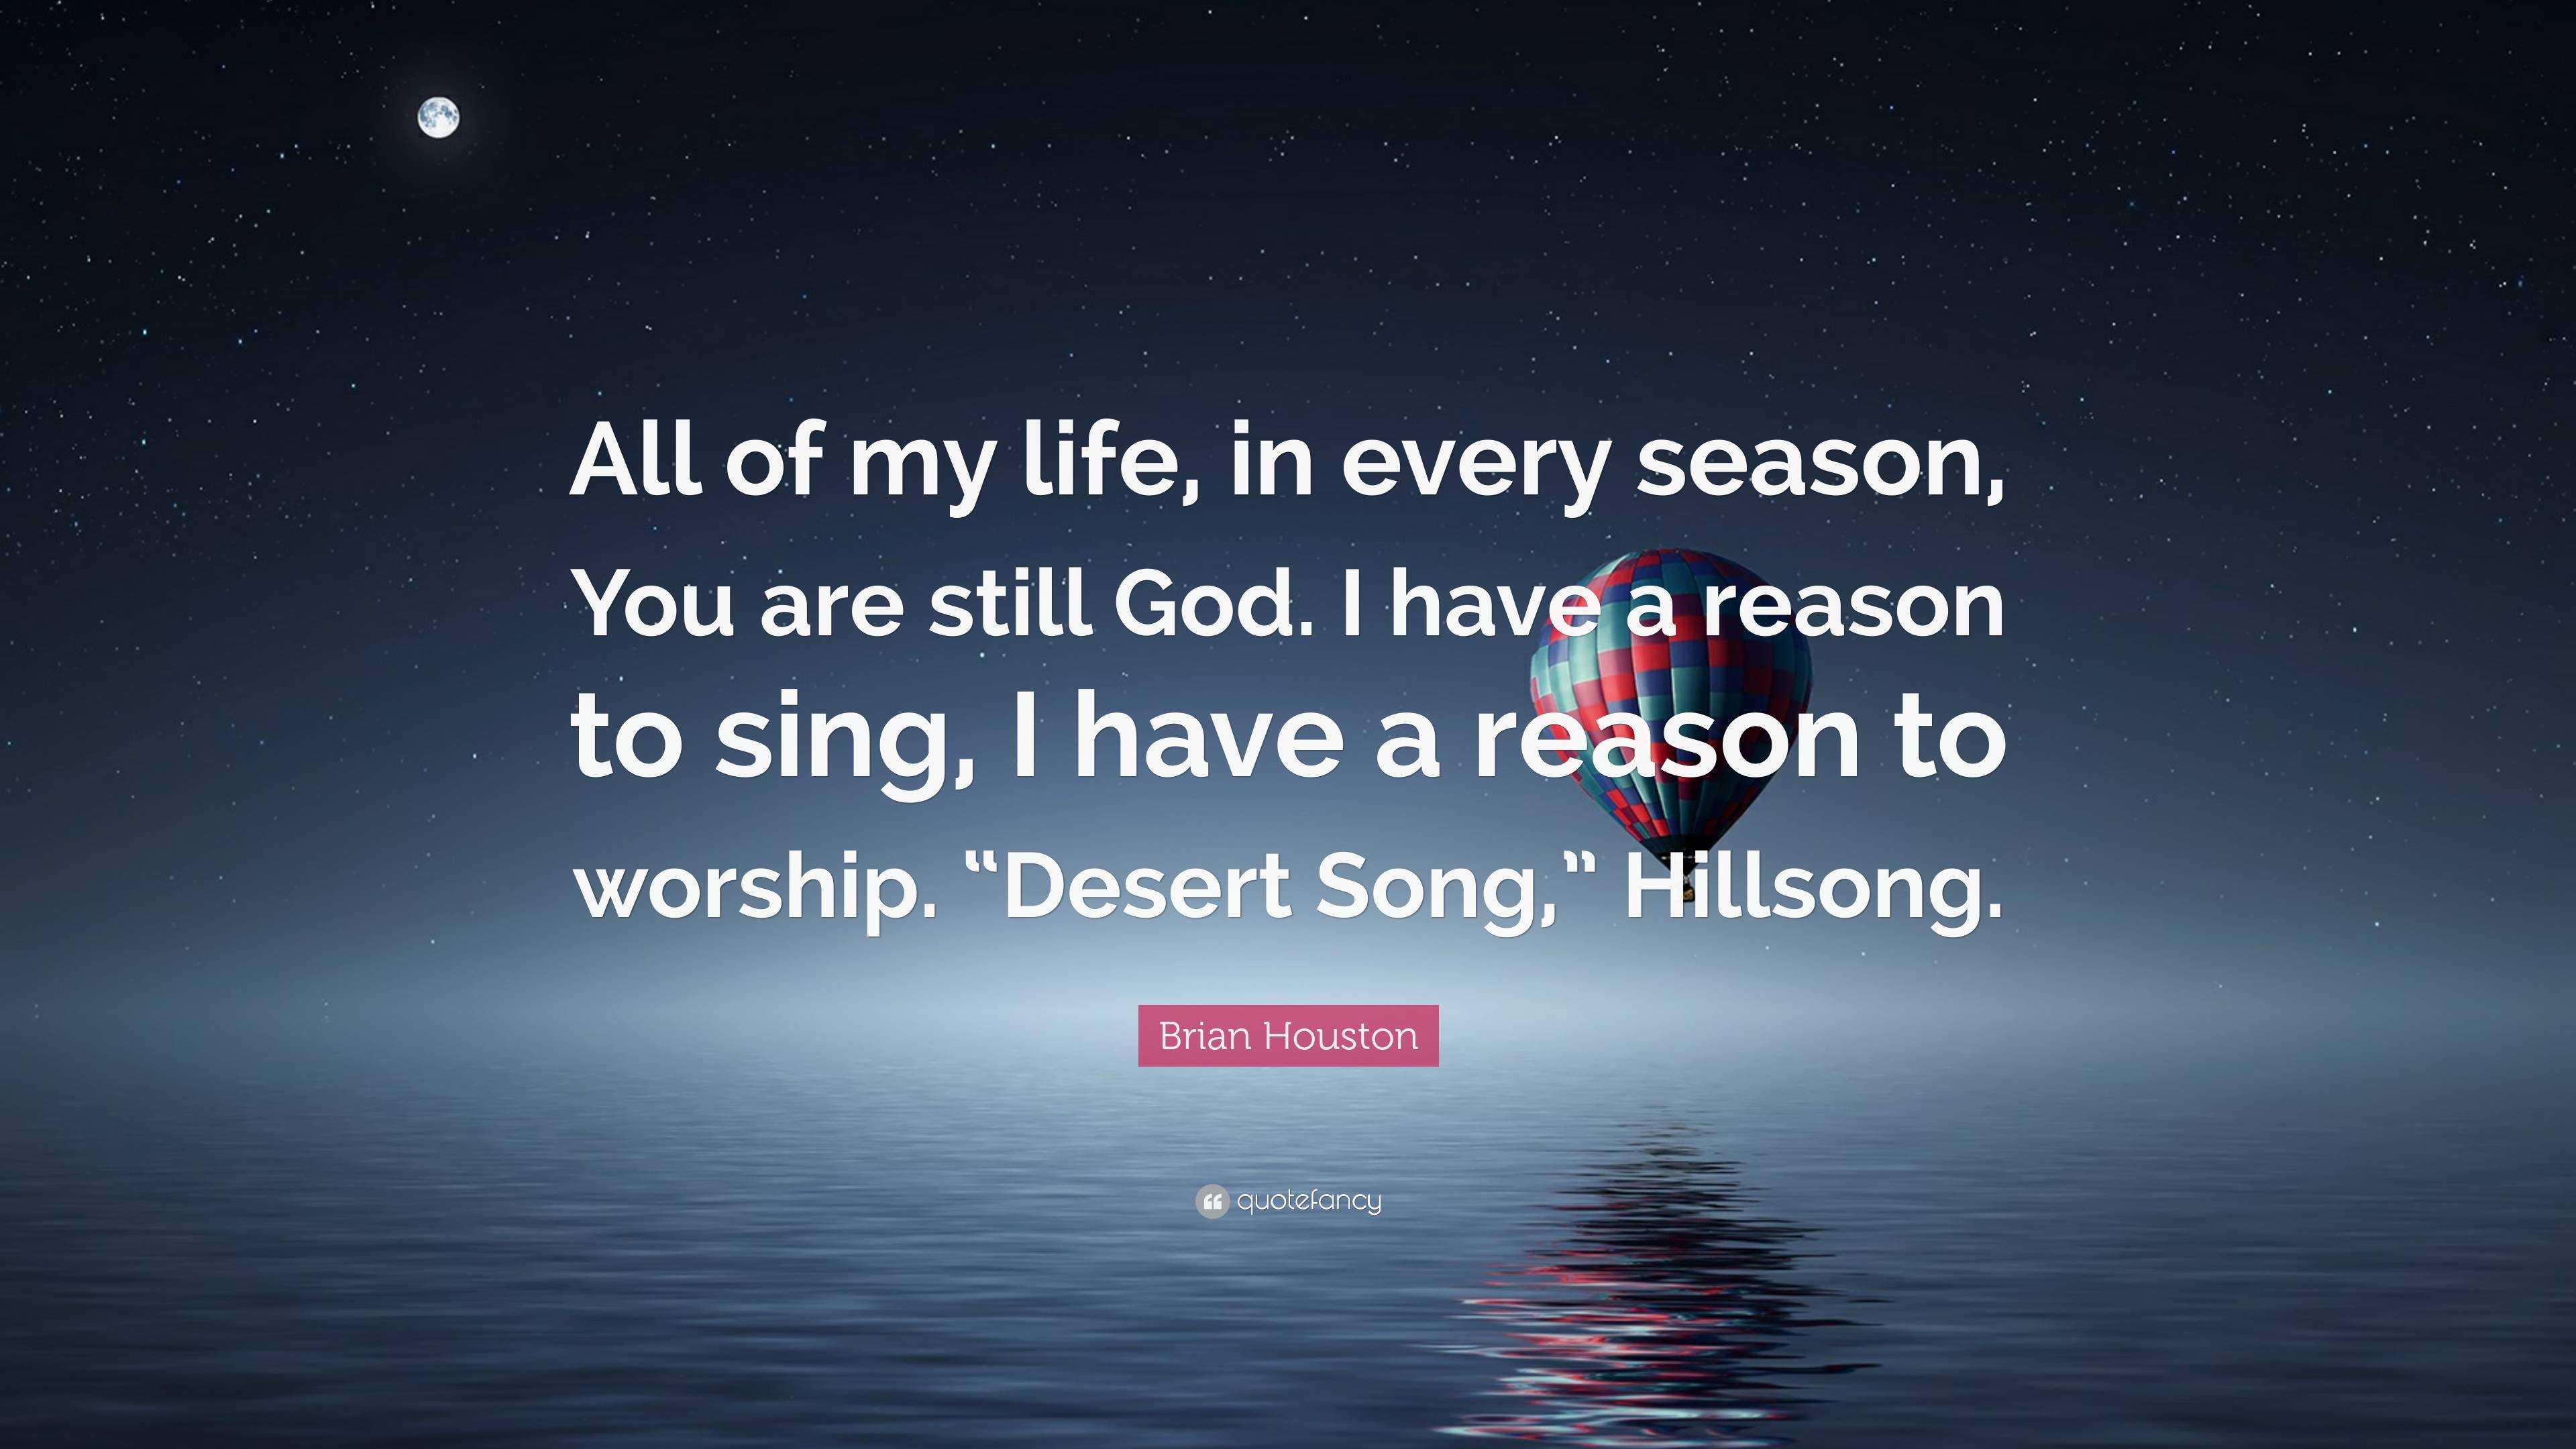 Brian Houston Quote All Of My Life In Every Season You Are Still God I Have A Reason To Sing I Have A Reason To Worship Desert Song